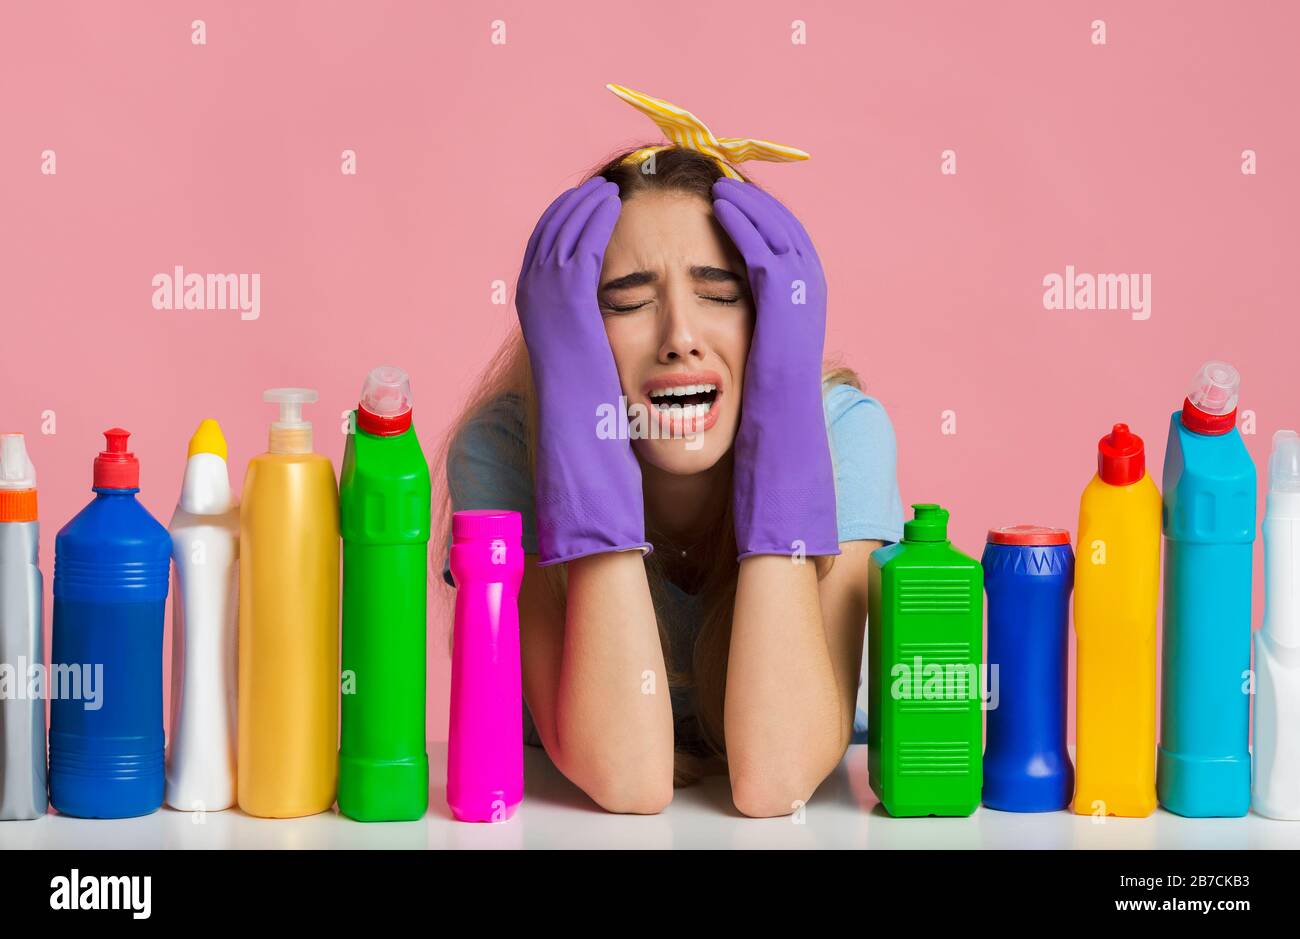 Young housewife crying by cleaning, near cleaning supplies Stock Photo